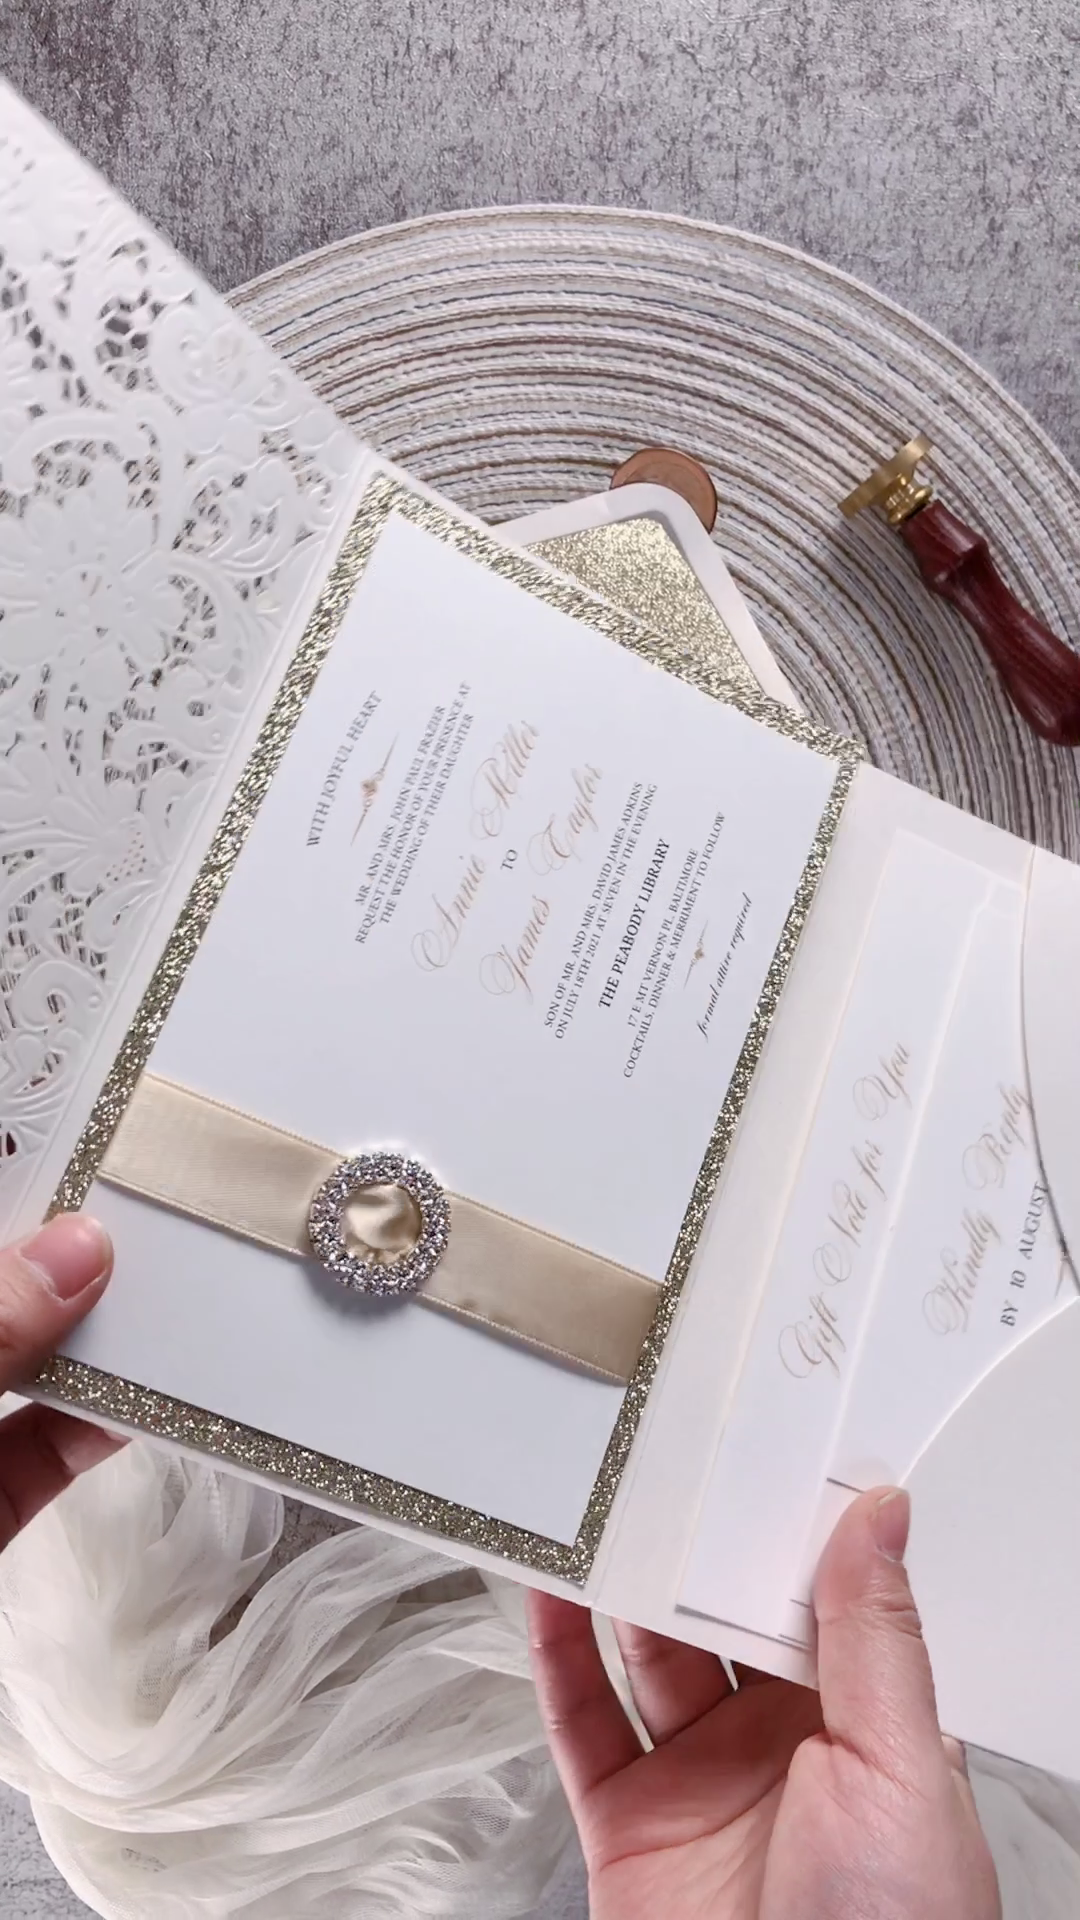 Formal Elegant Ivory And Champagne Gold Glittery Pocket Wedding Invitations With Bling Reinstone -   19 wedding Planning videos ideas